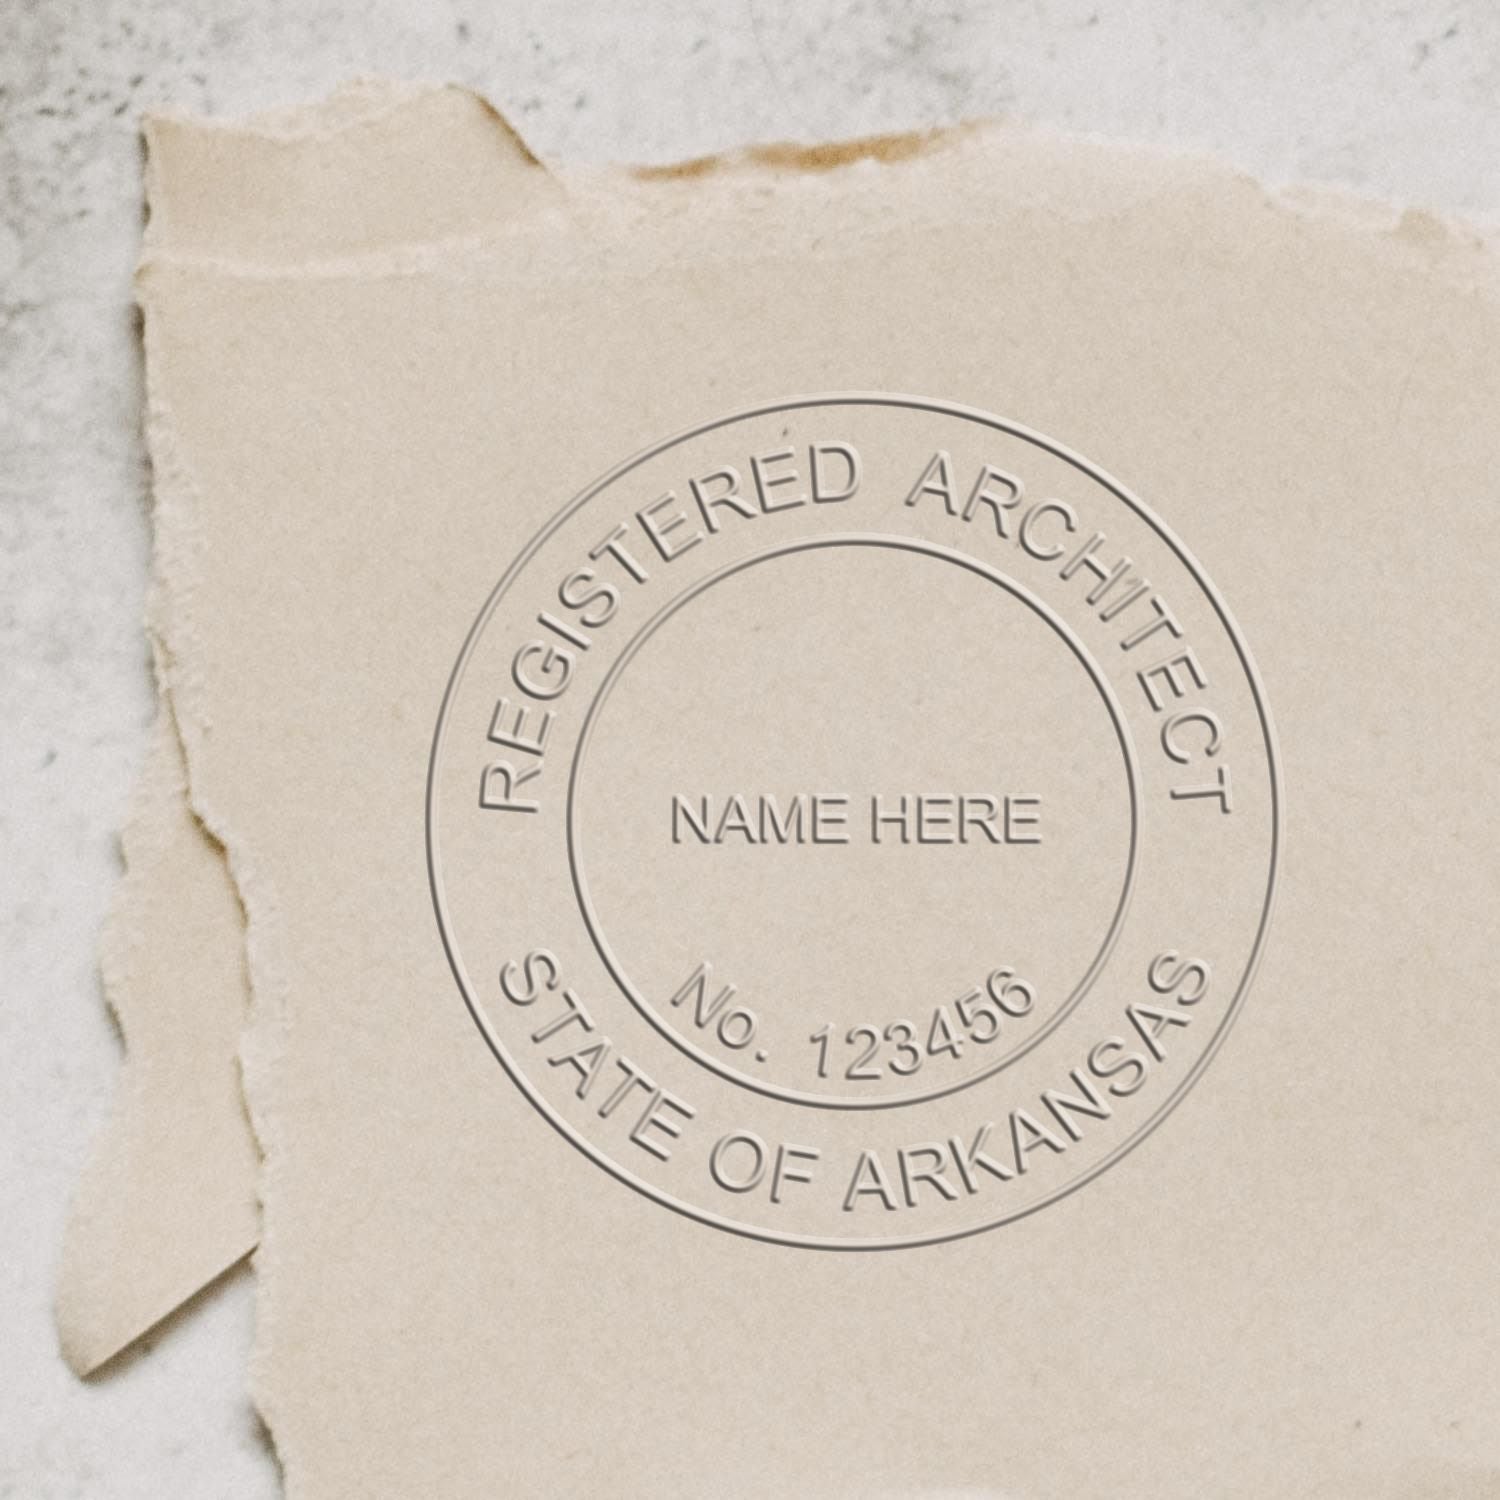 The State of Arkansas Long Reach Architectural Embossing Seal stamp impression comes to life with a crisp, detailed photo on paper - showcasing true professional quality.